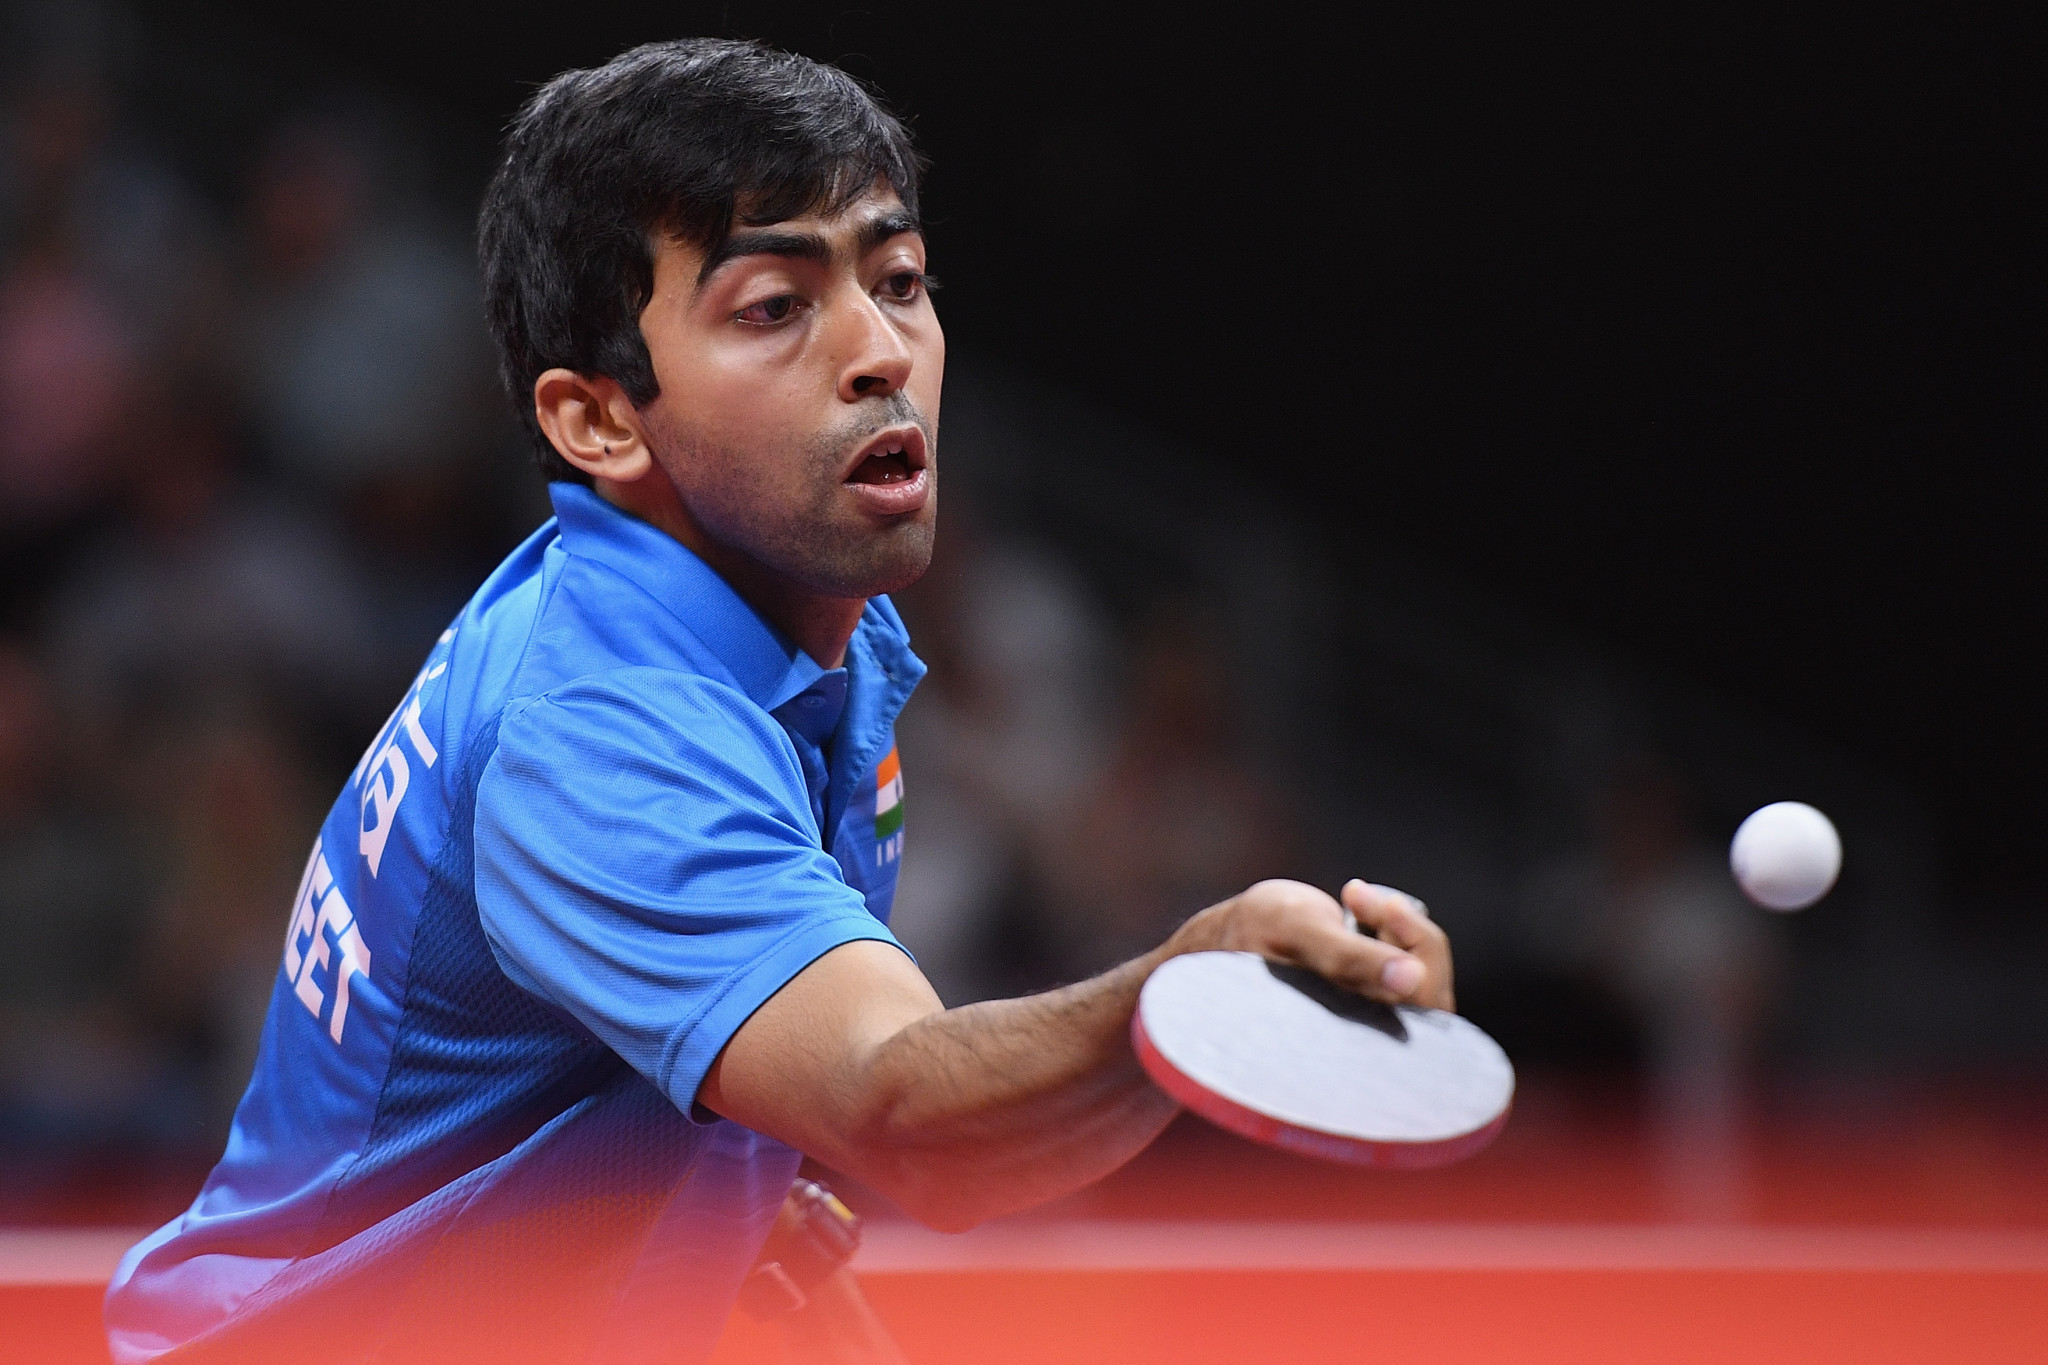 Harmeet Desai got the better of the world number 24 and compatriot Sathiyan Gnanasekaran to claim gold as India dominated the final day at the Commonwealth Table Table Championships ©Getty Images